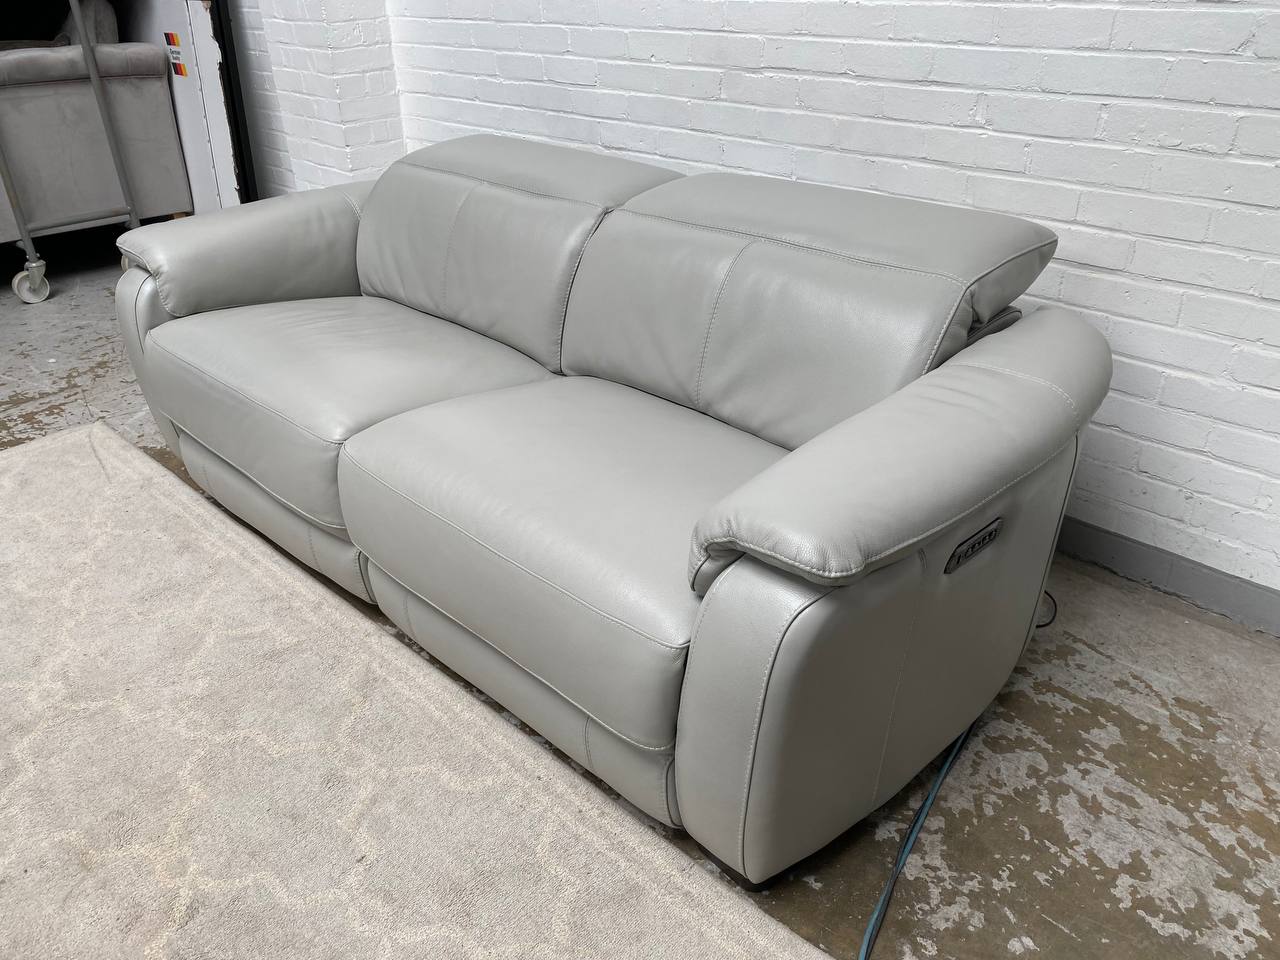 World of Leather Naomi Power Recliner 3 Seater Sofa.